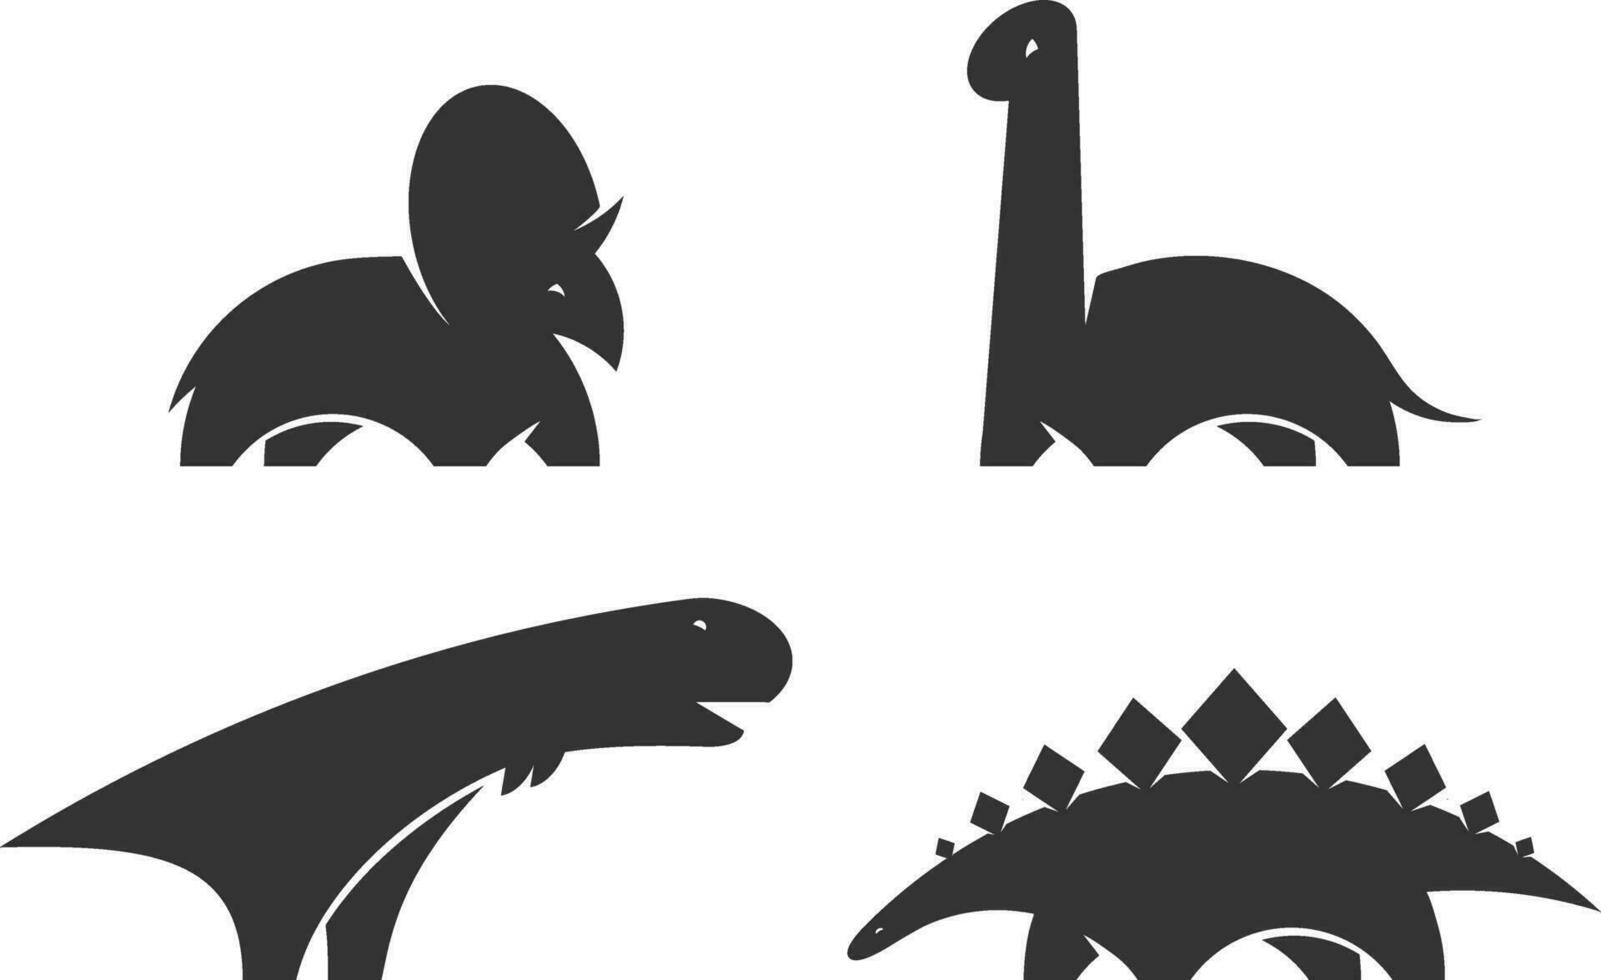 Dinosaur vector logo design element. Jurassic park world. Set dinosaurs silhouette isolated on white background. Collection dino icons web site template.